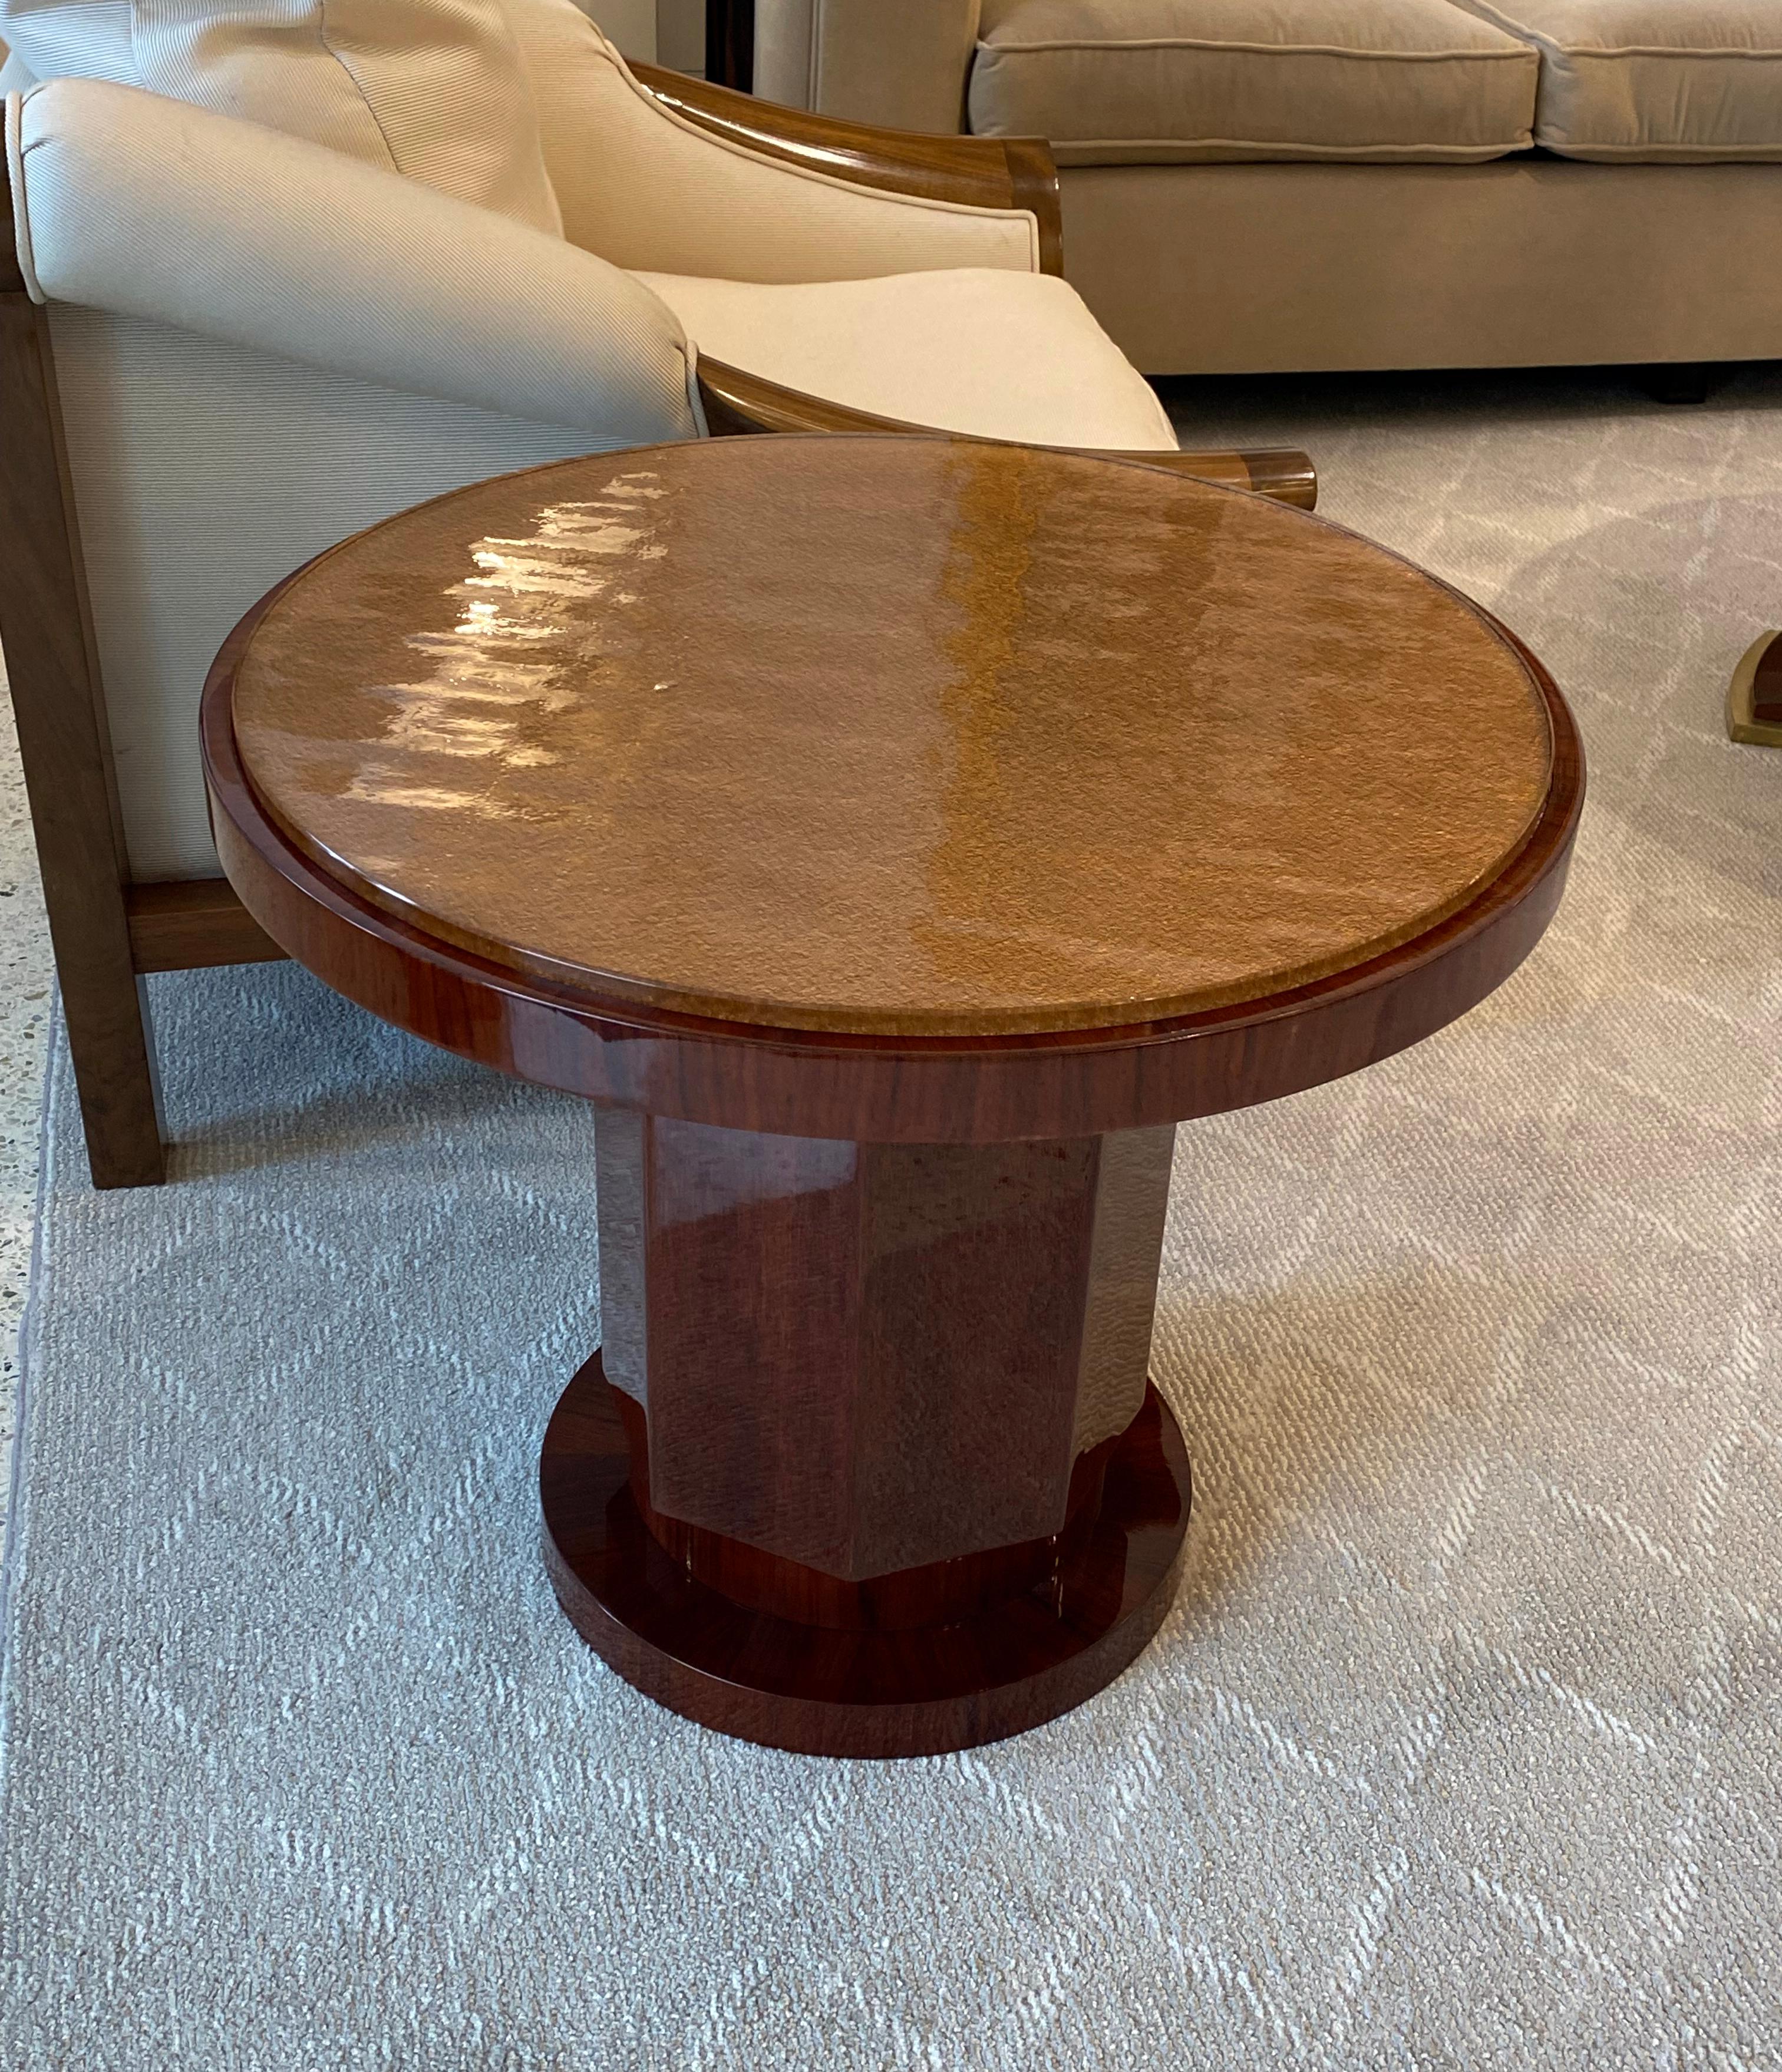 Art Deco pair of round side tables made of rosewood with gilded pebbled glass tops designed by Joubert et Petit (DIM).
Made in France. 
Circa: 1935.